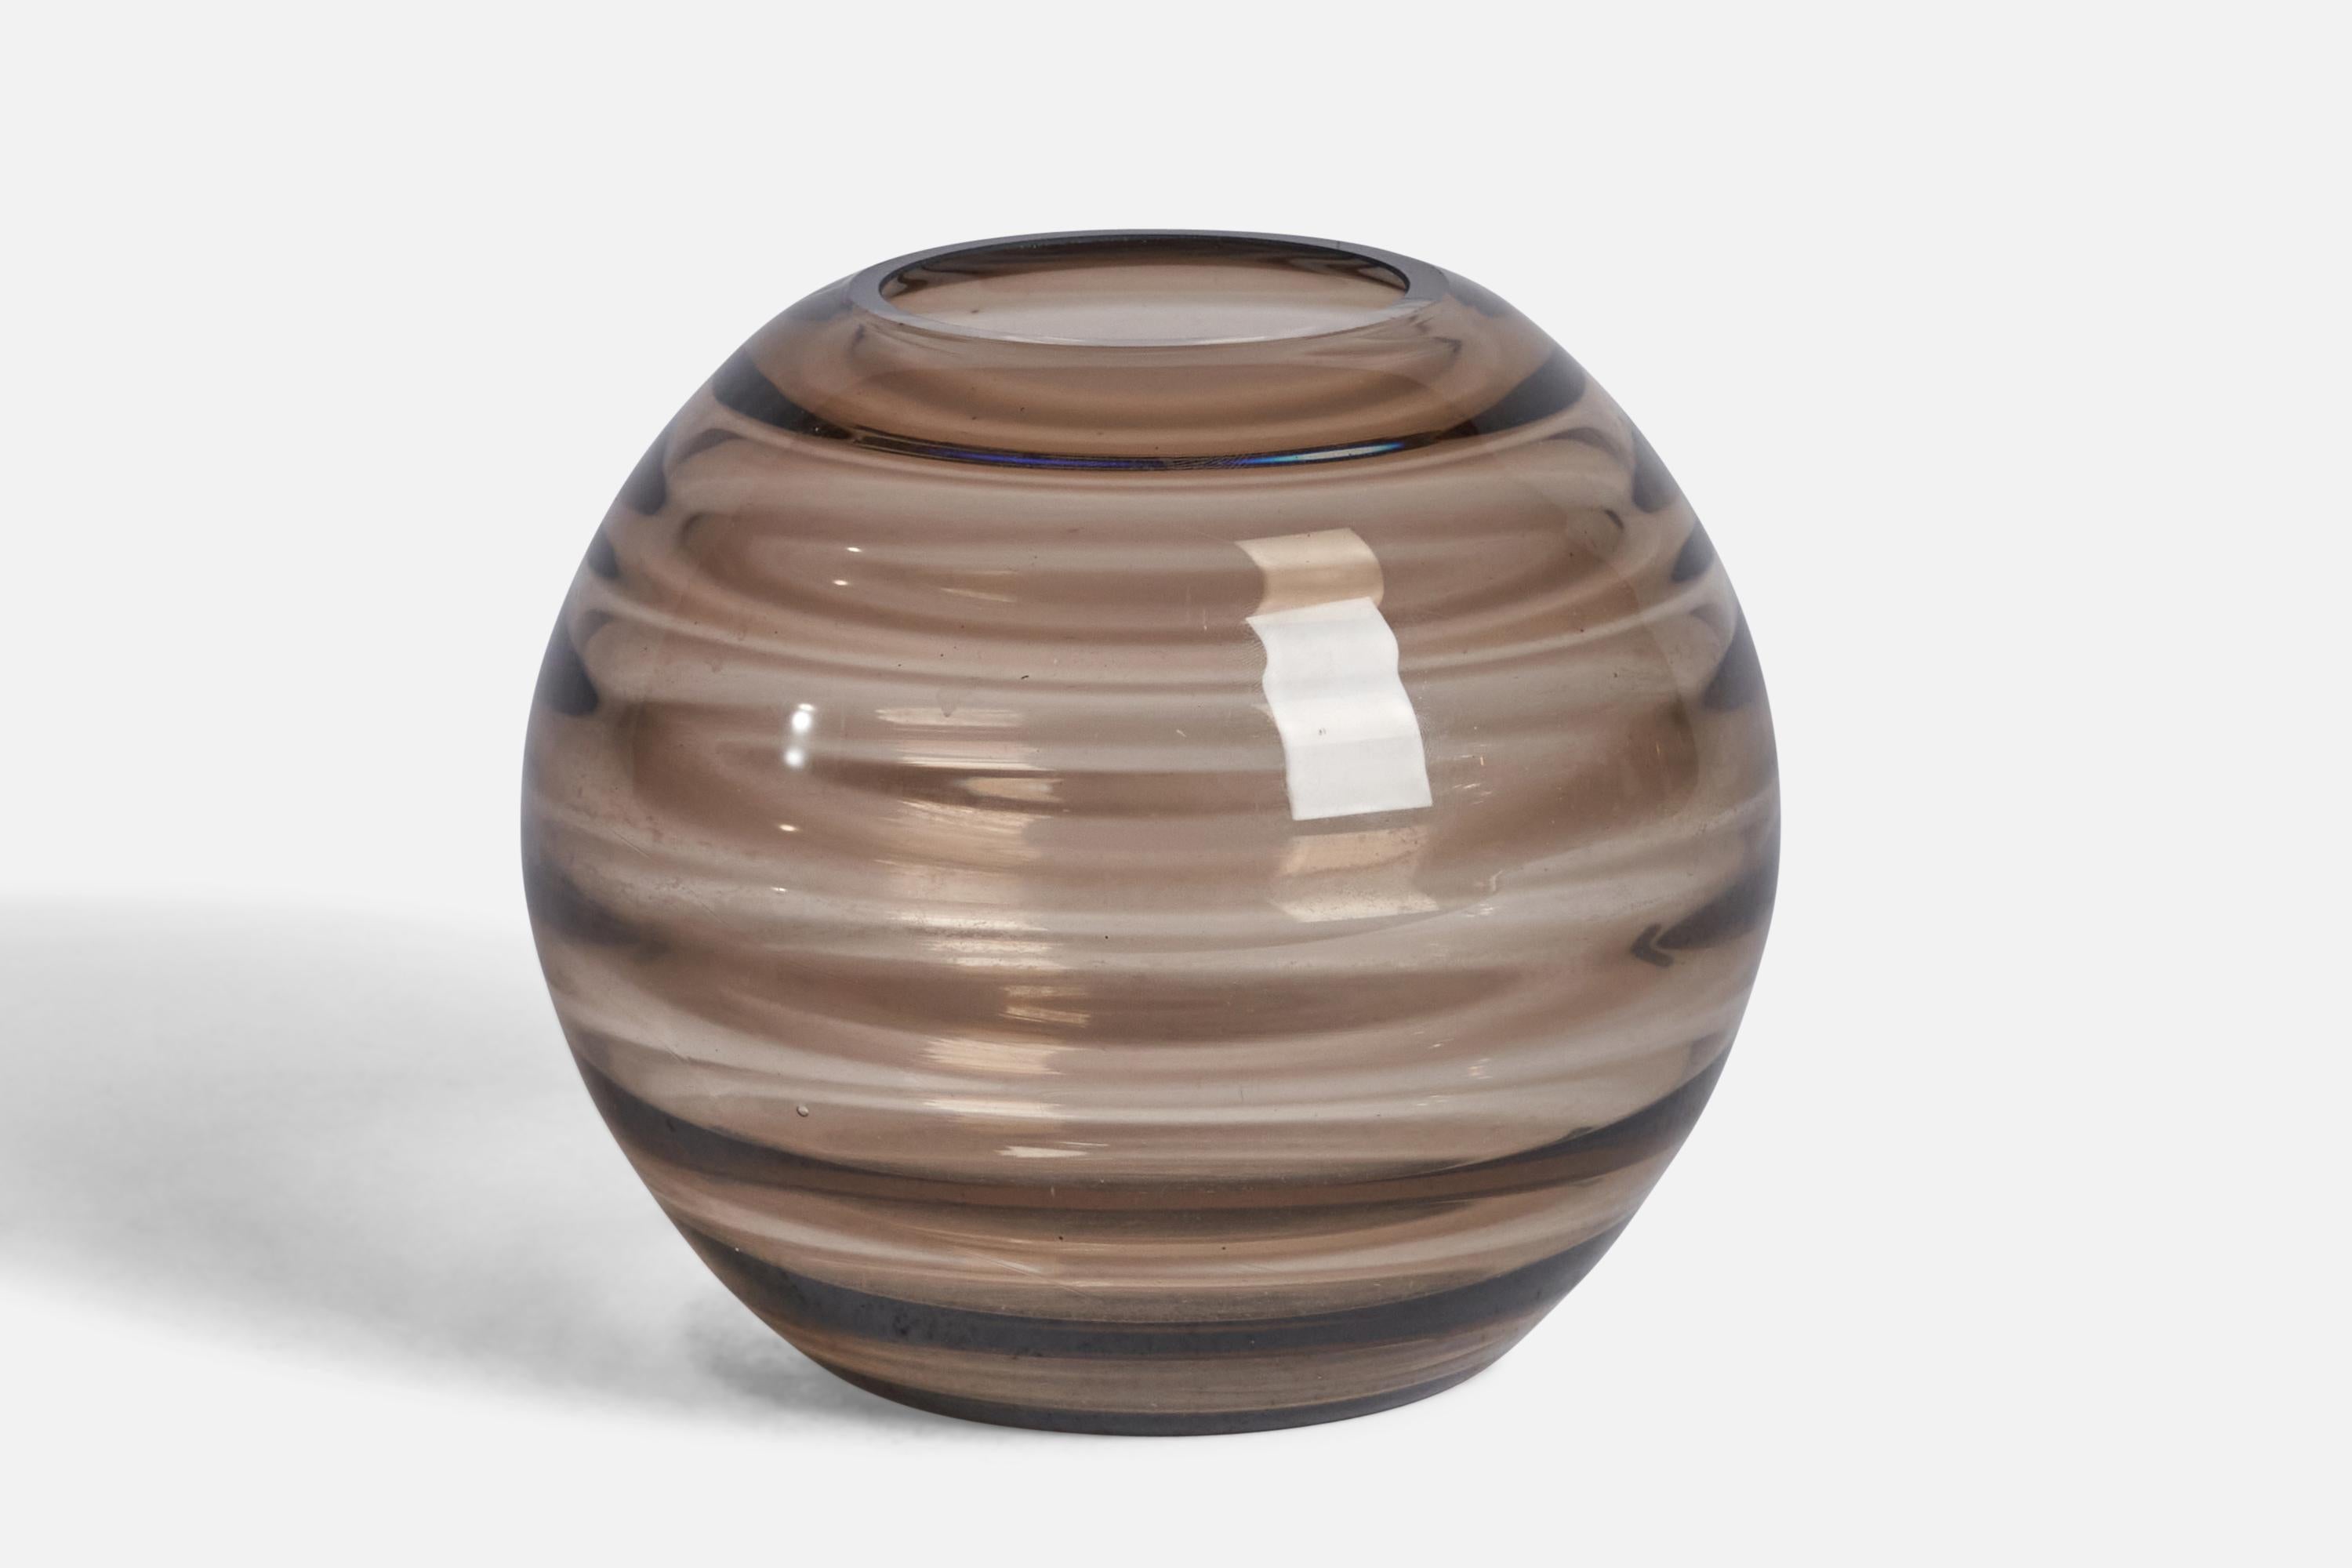 A smoked blown glass vase designed by Ewald Hald and produced by Orrefors, Sweden, c. 1930s.